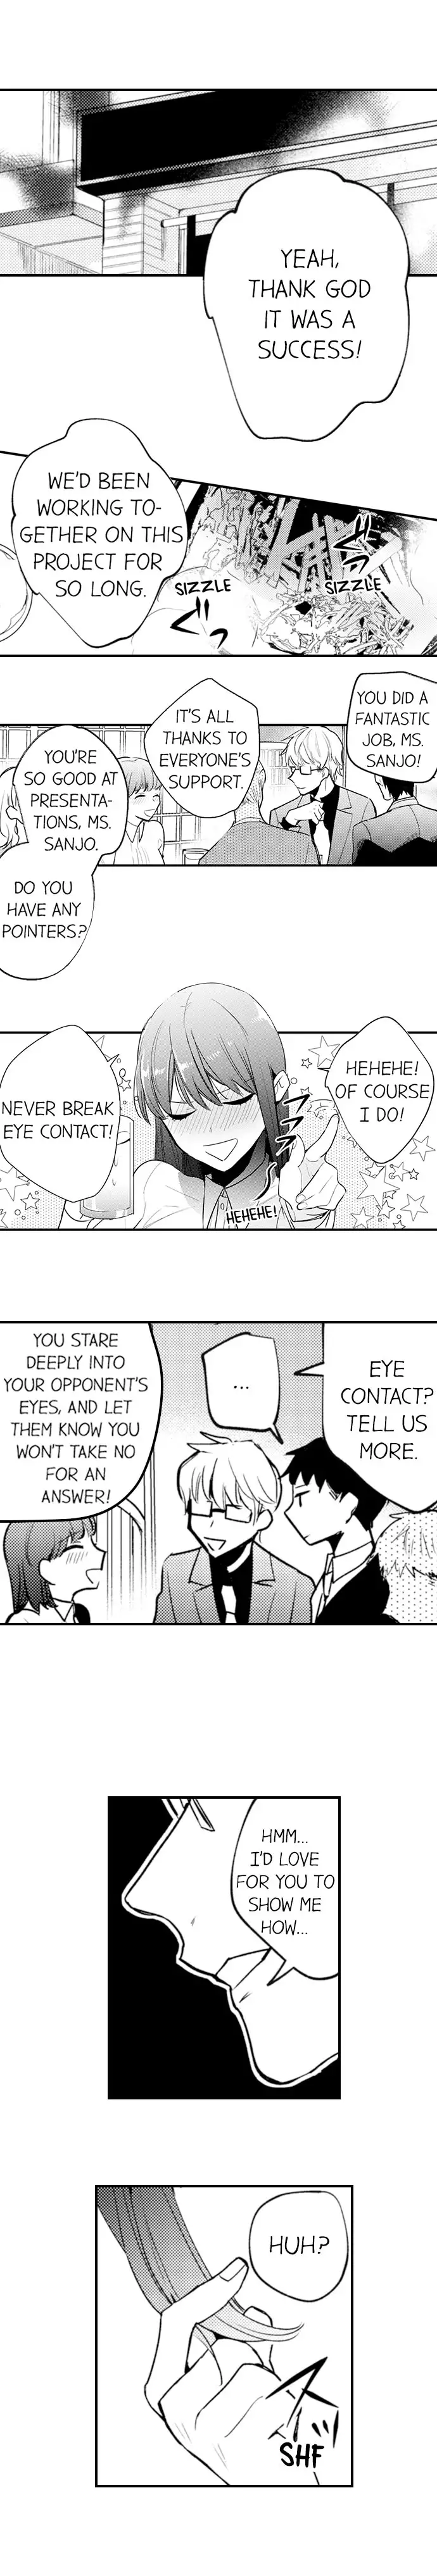 3 Hours + Love Hotel = You’re Mine - Chapter 5 Page 2